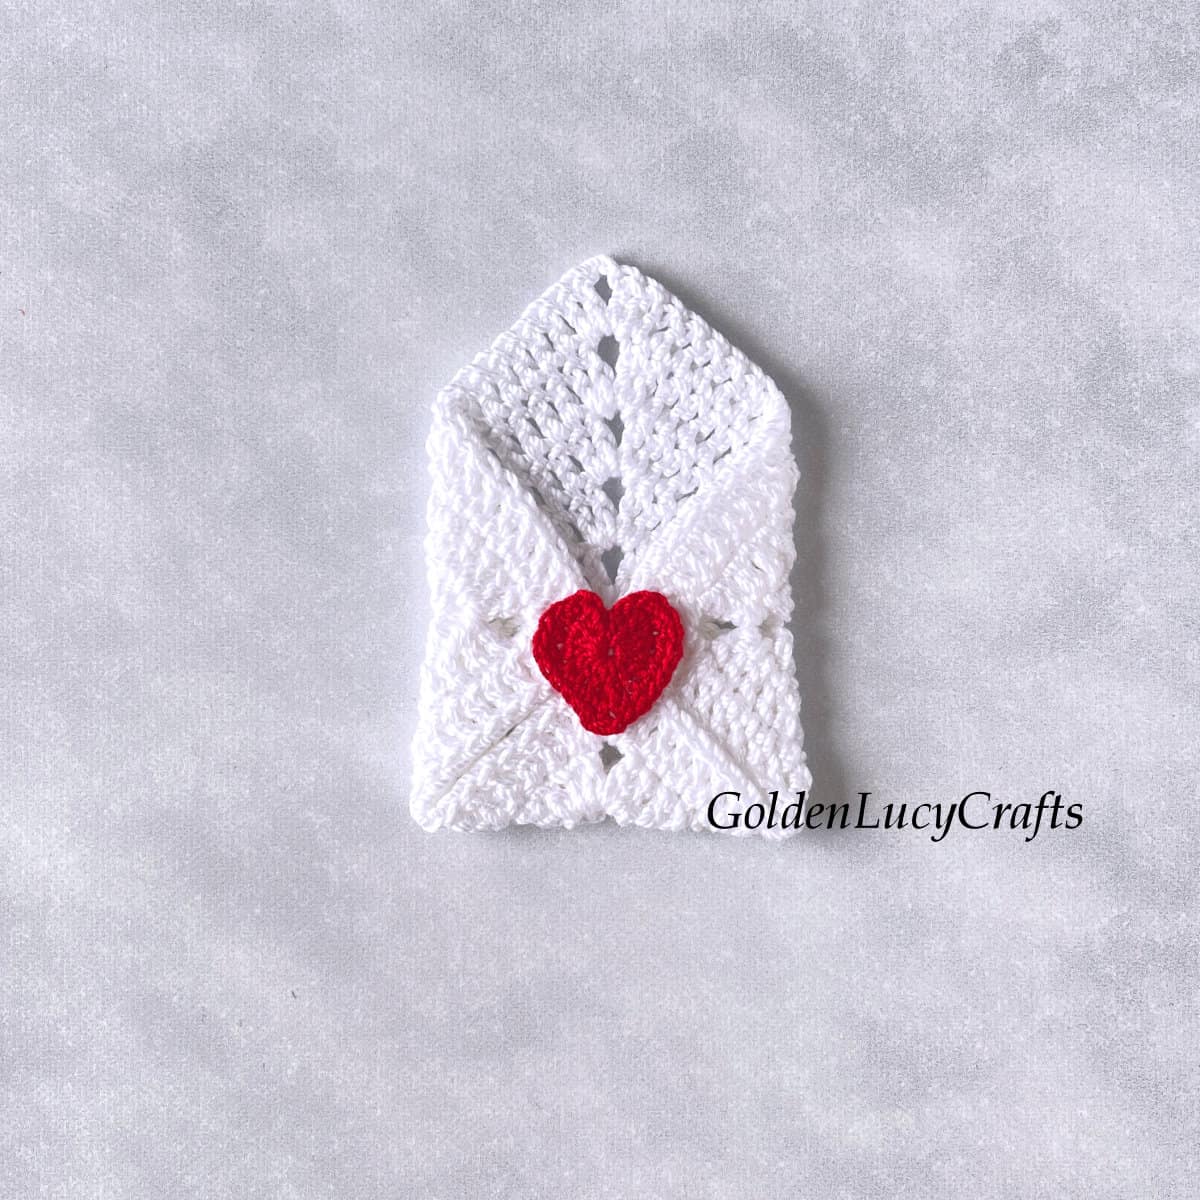 Crochet white envelope with red heart seal.